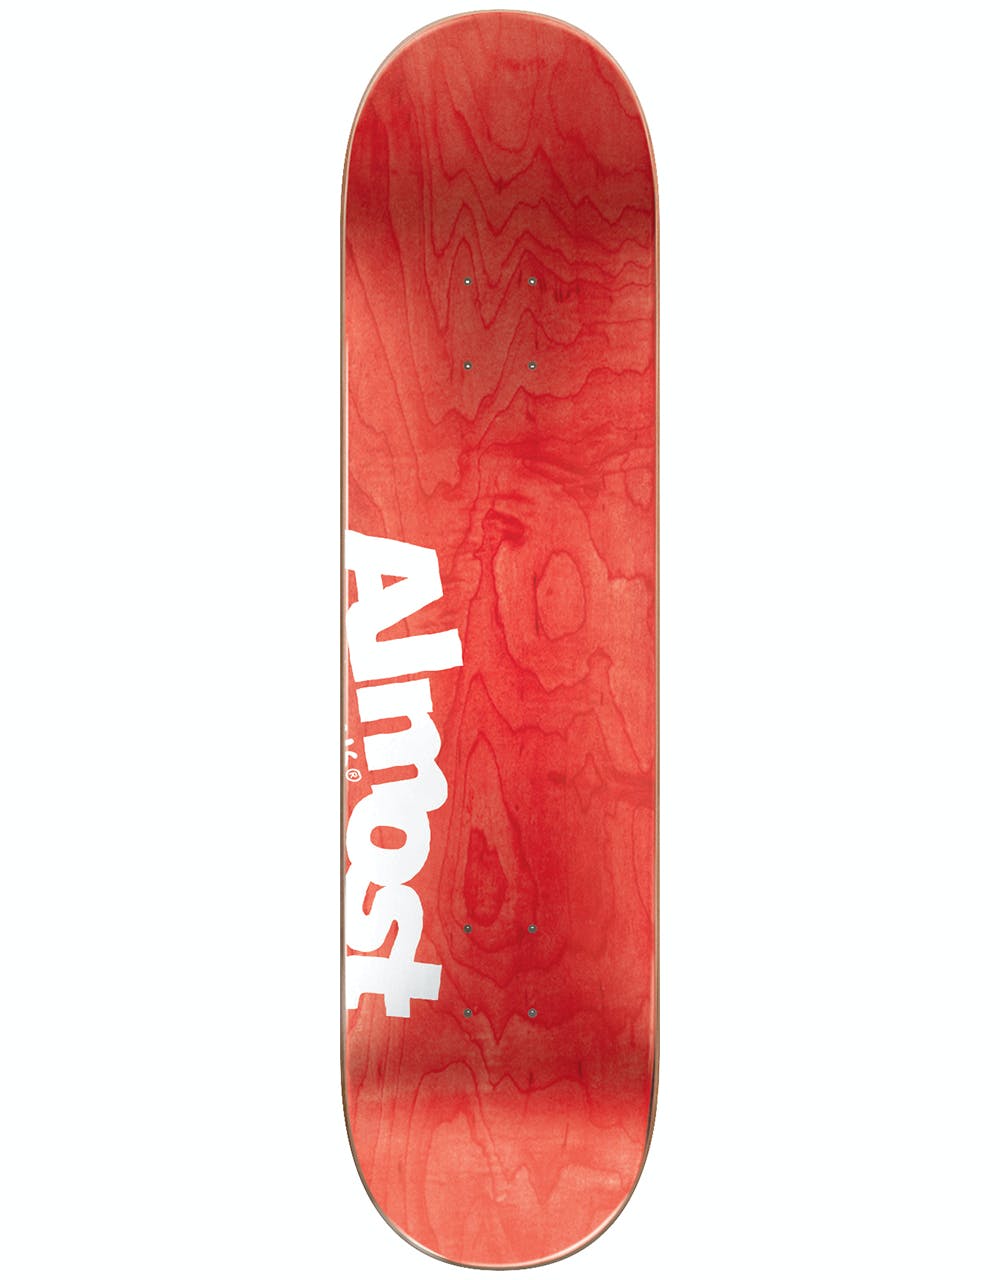 Almost Dip Dyed Rings Impact Support Skateboard Deck - 8.25"